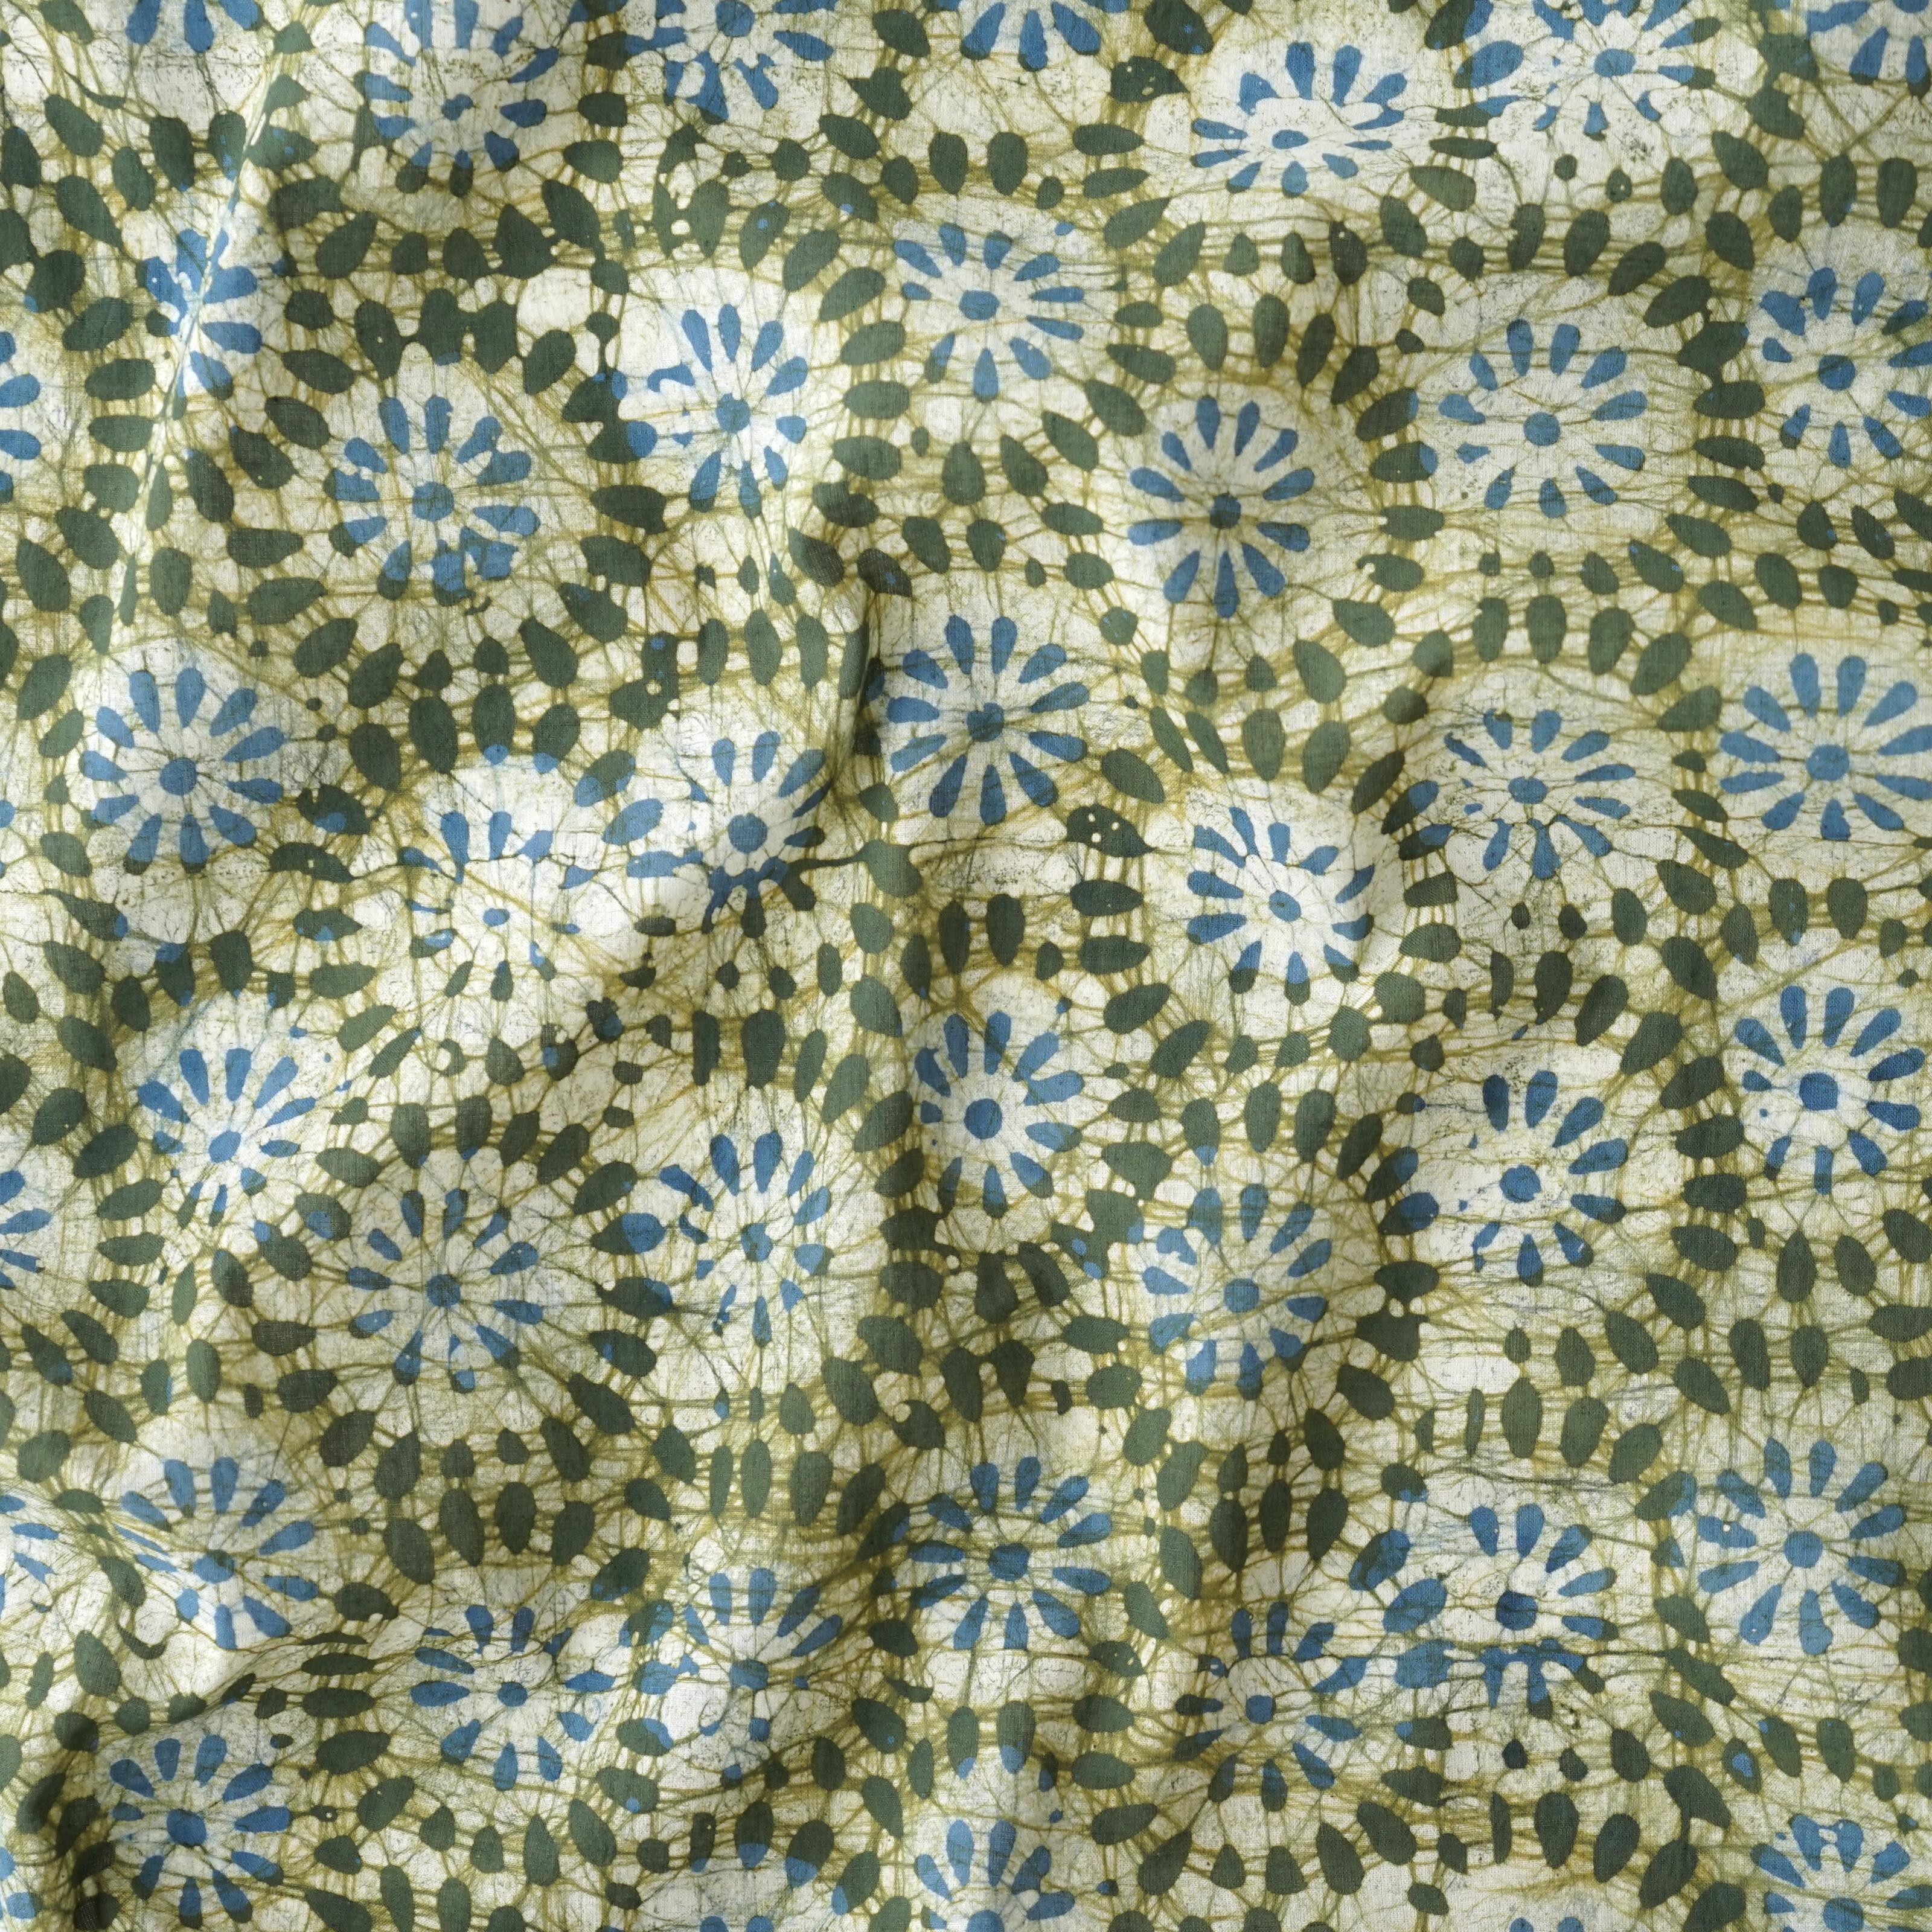 100% Block-Printed Batik Cotton Fabric From India - Lime Pickle Design - Reactive Dye - Contrast